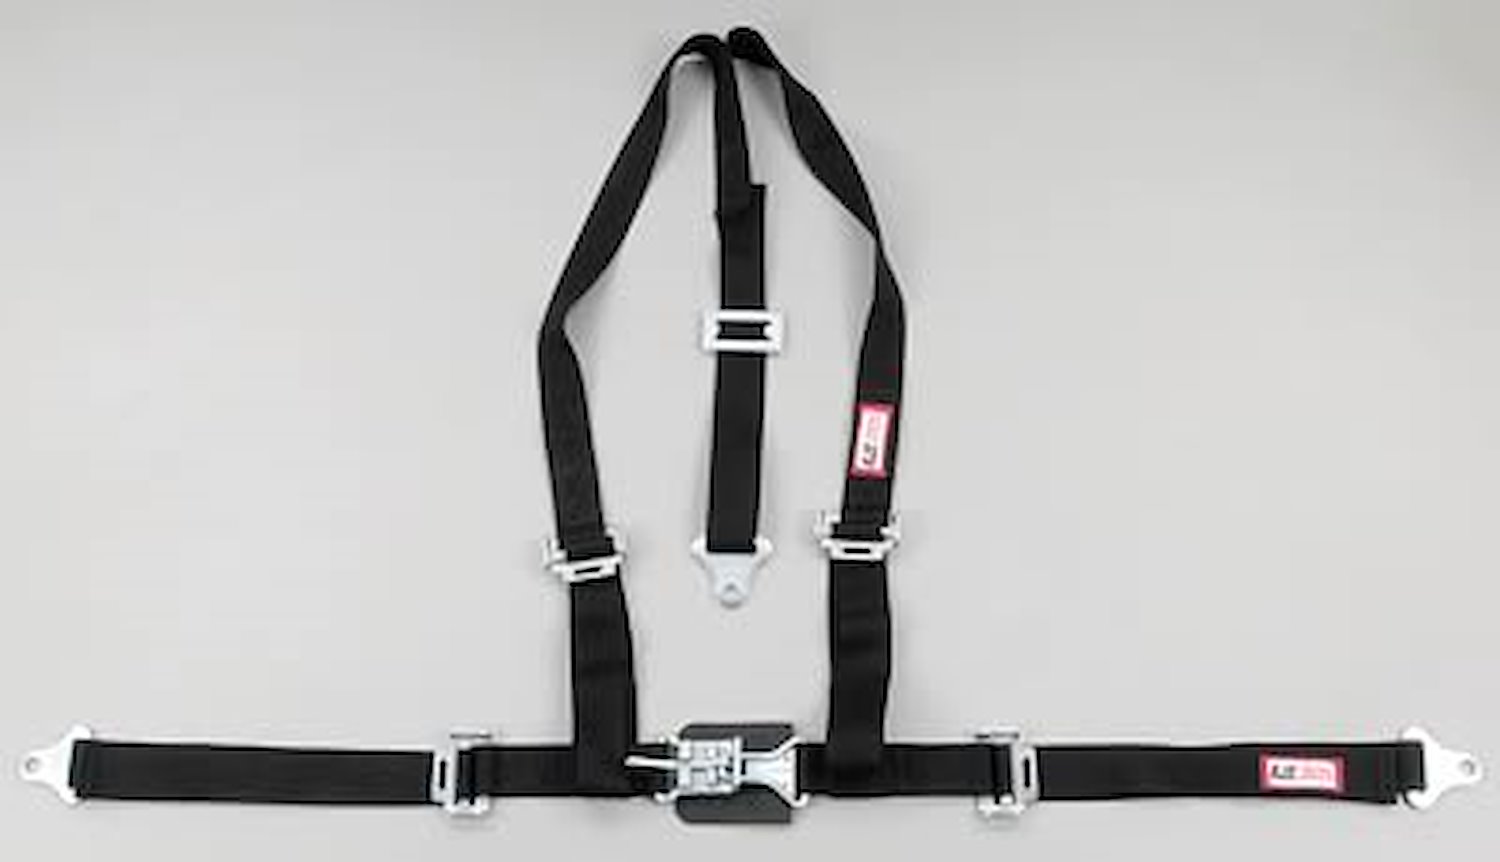 NON-SFI L&L HARNESS 3 PULL UP Lap Belt BOLT SEWN IN 2 S.H. Y FLOOR Mount w/STERNUM STRAP WRAP/BOLT YELLOW